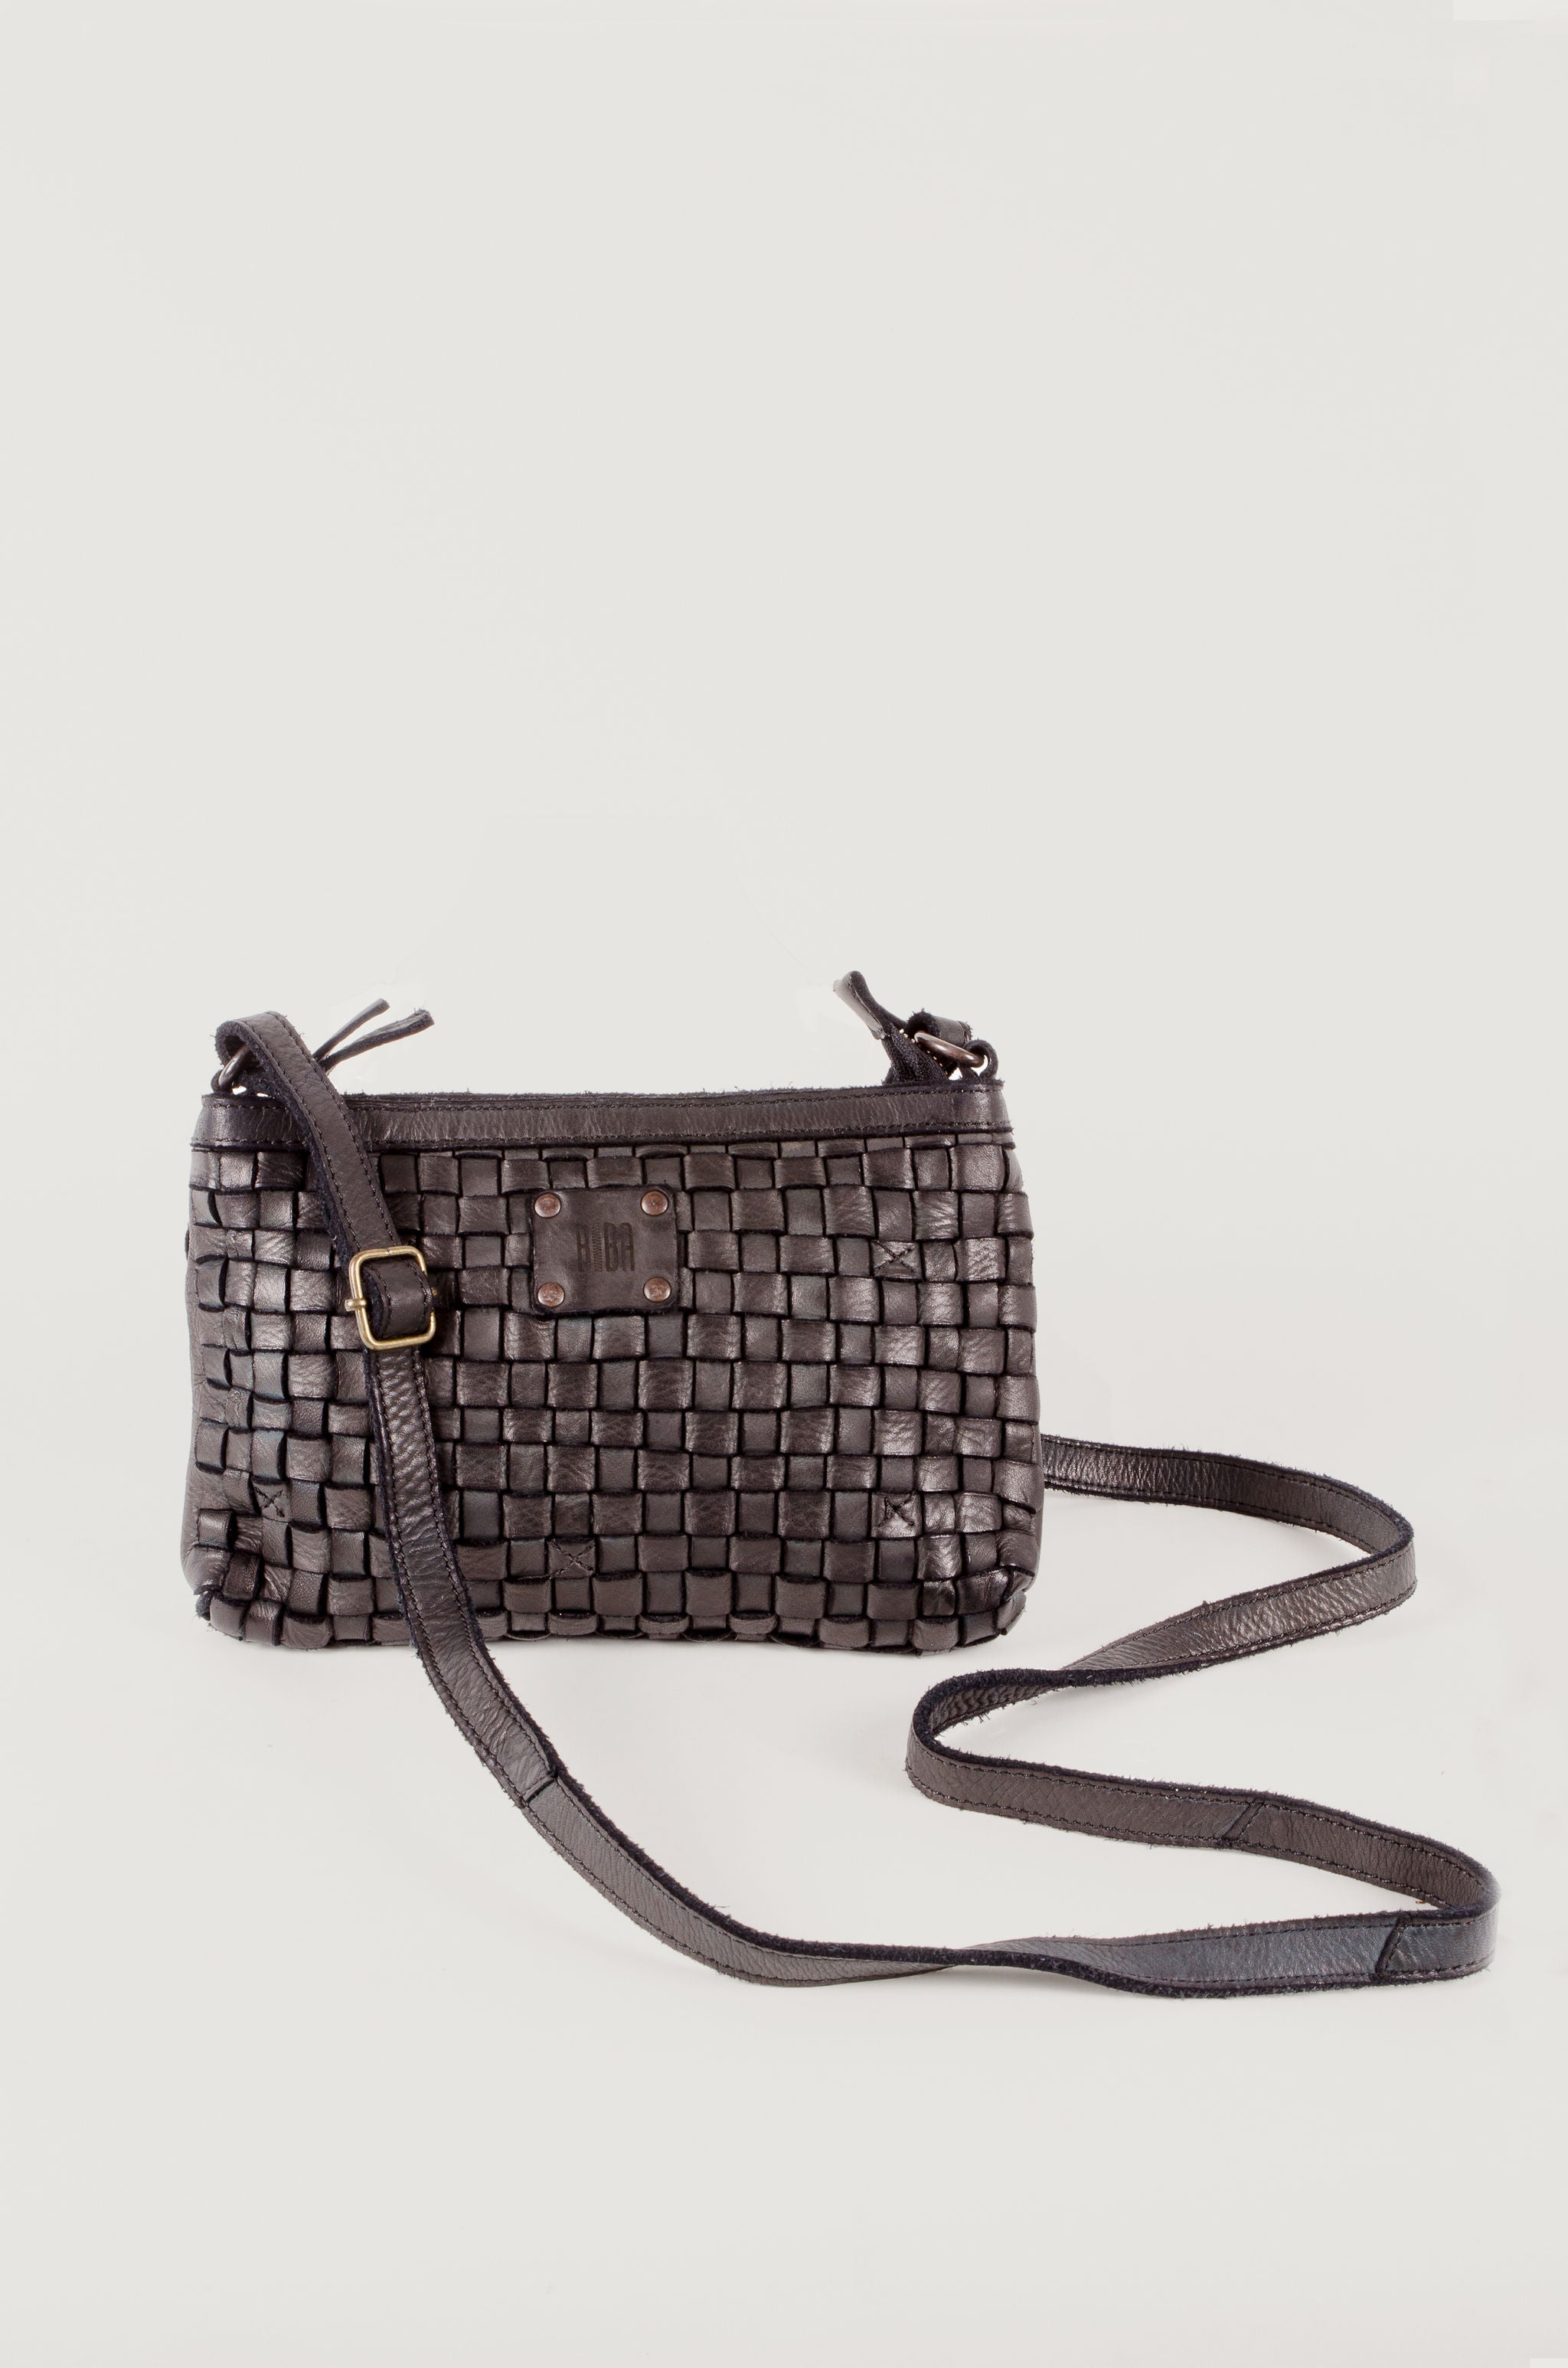 & Other Stories leather and suede braided cross body bag in black | ASOS